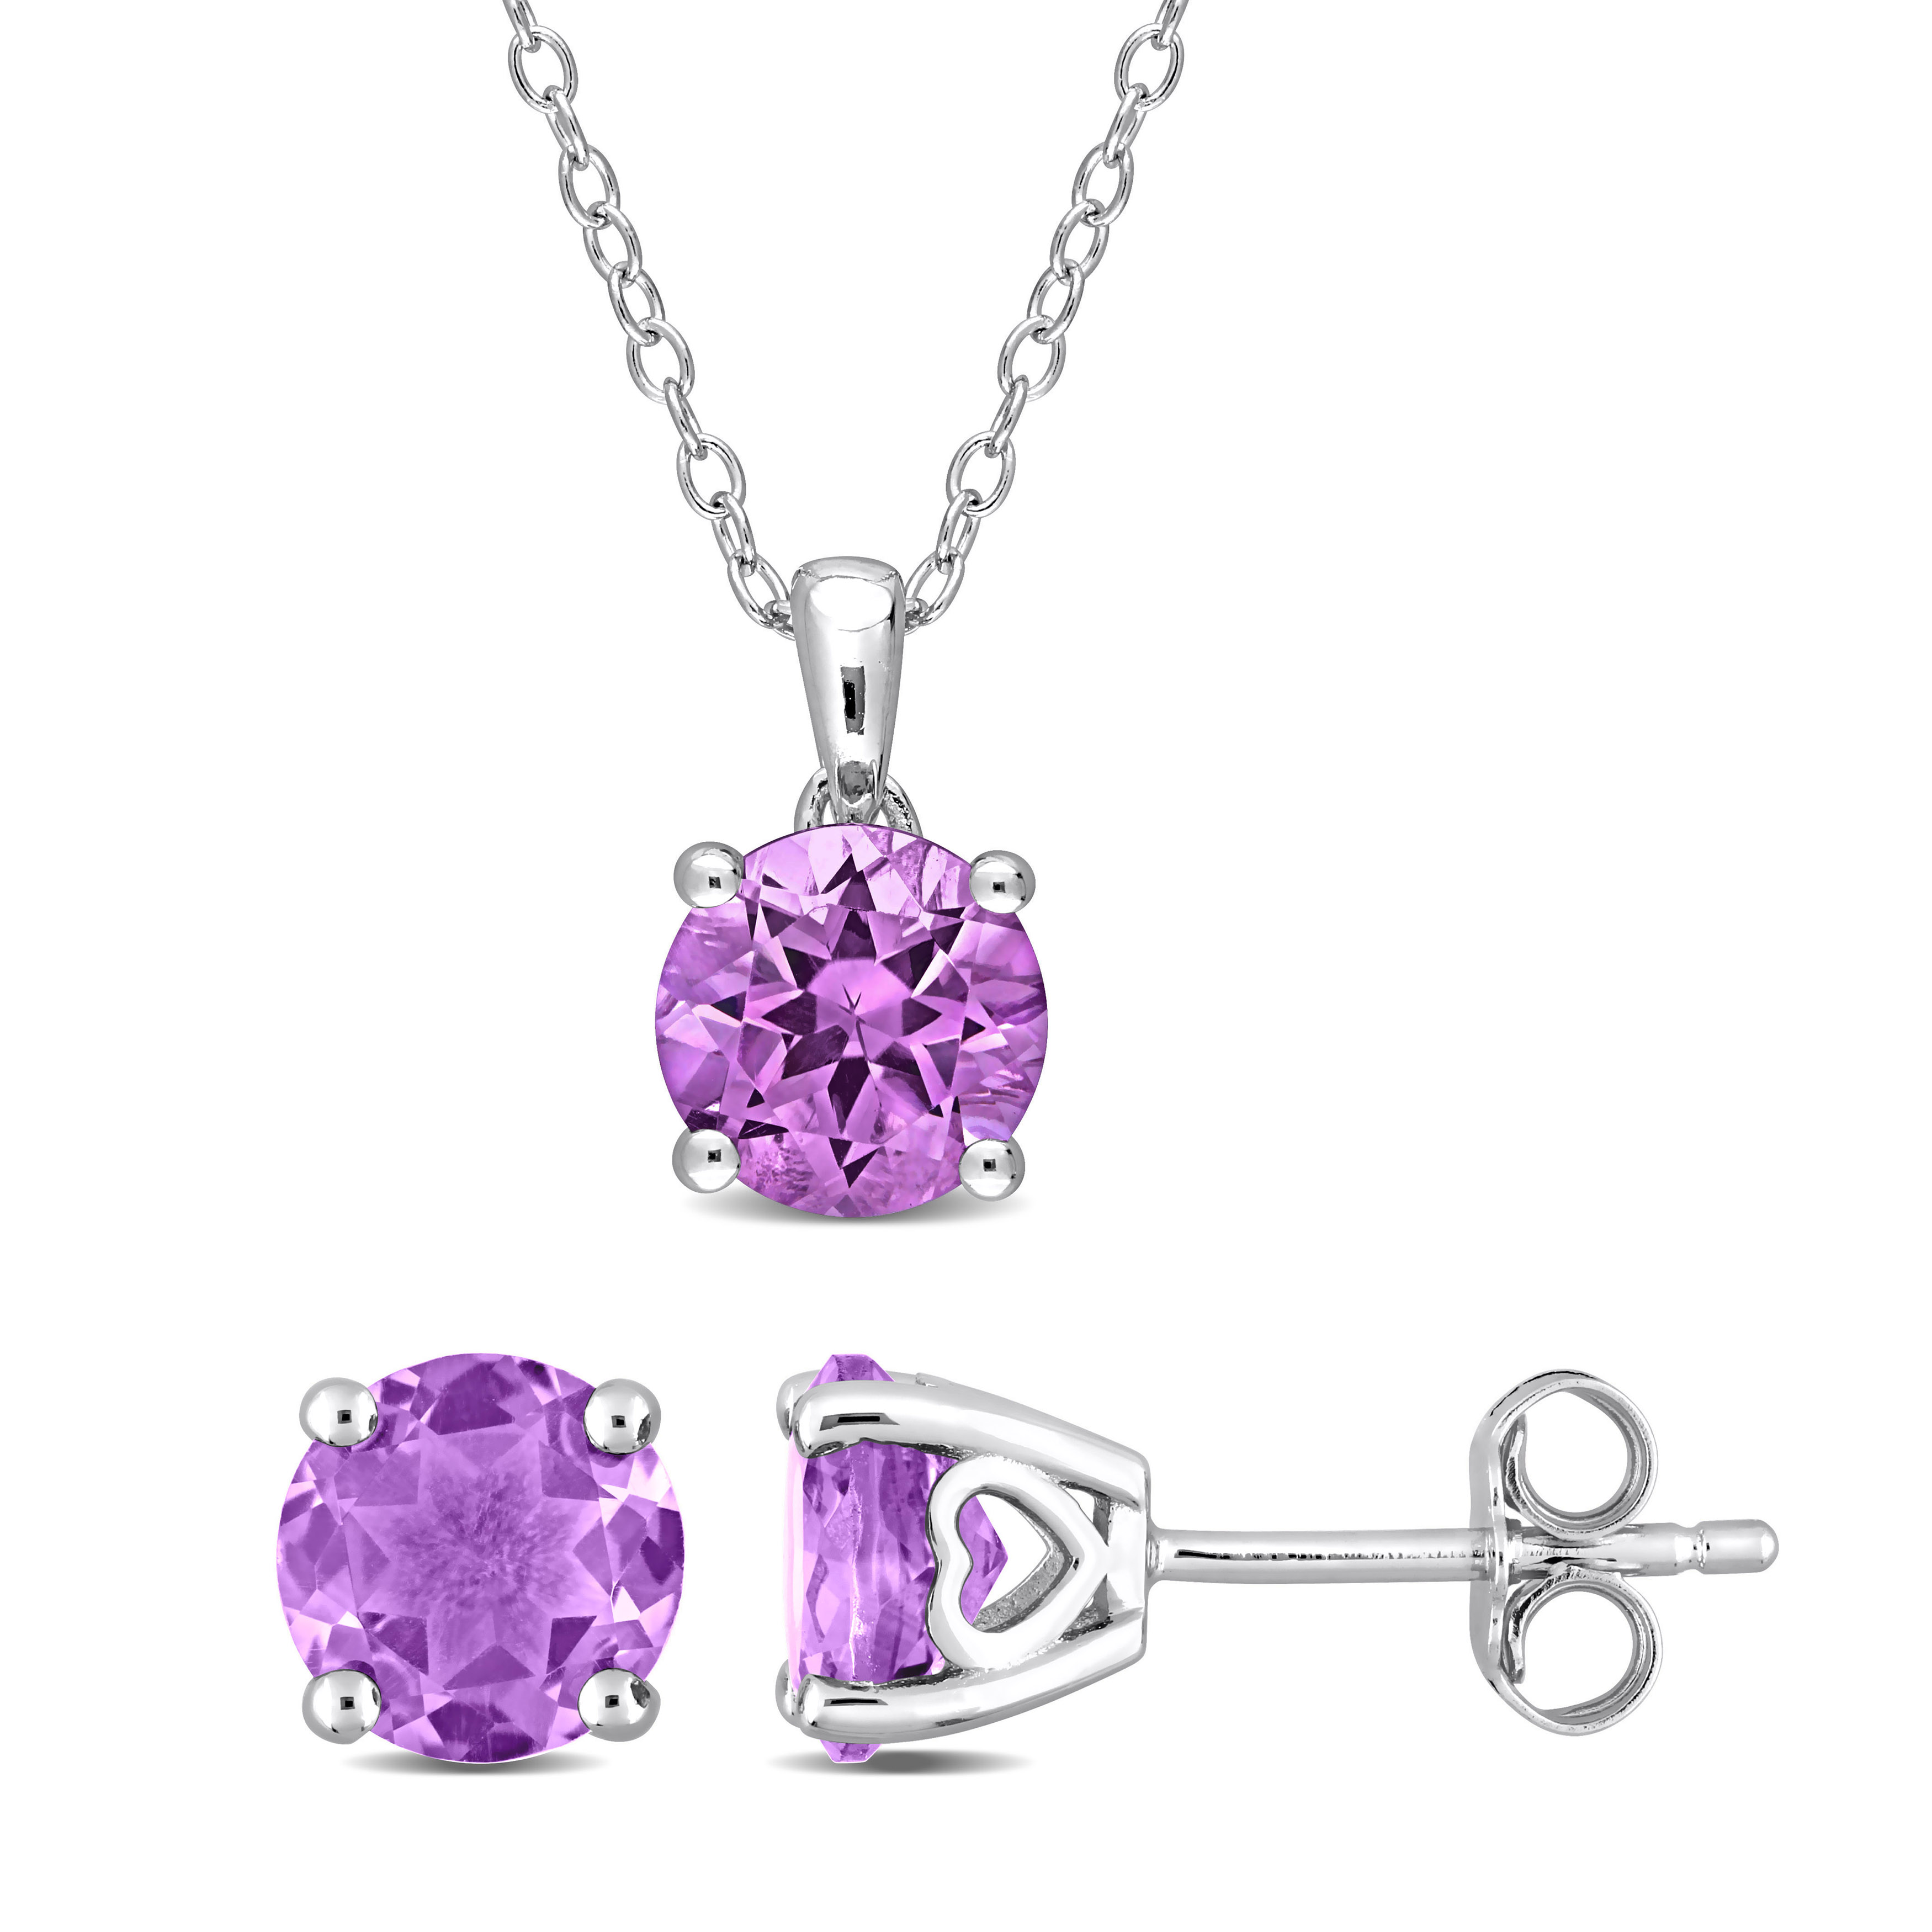 4 CT TGW Amethyst Solitaire Stud Earring and Pendant with chain Set in Sterling Silver